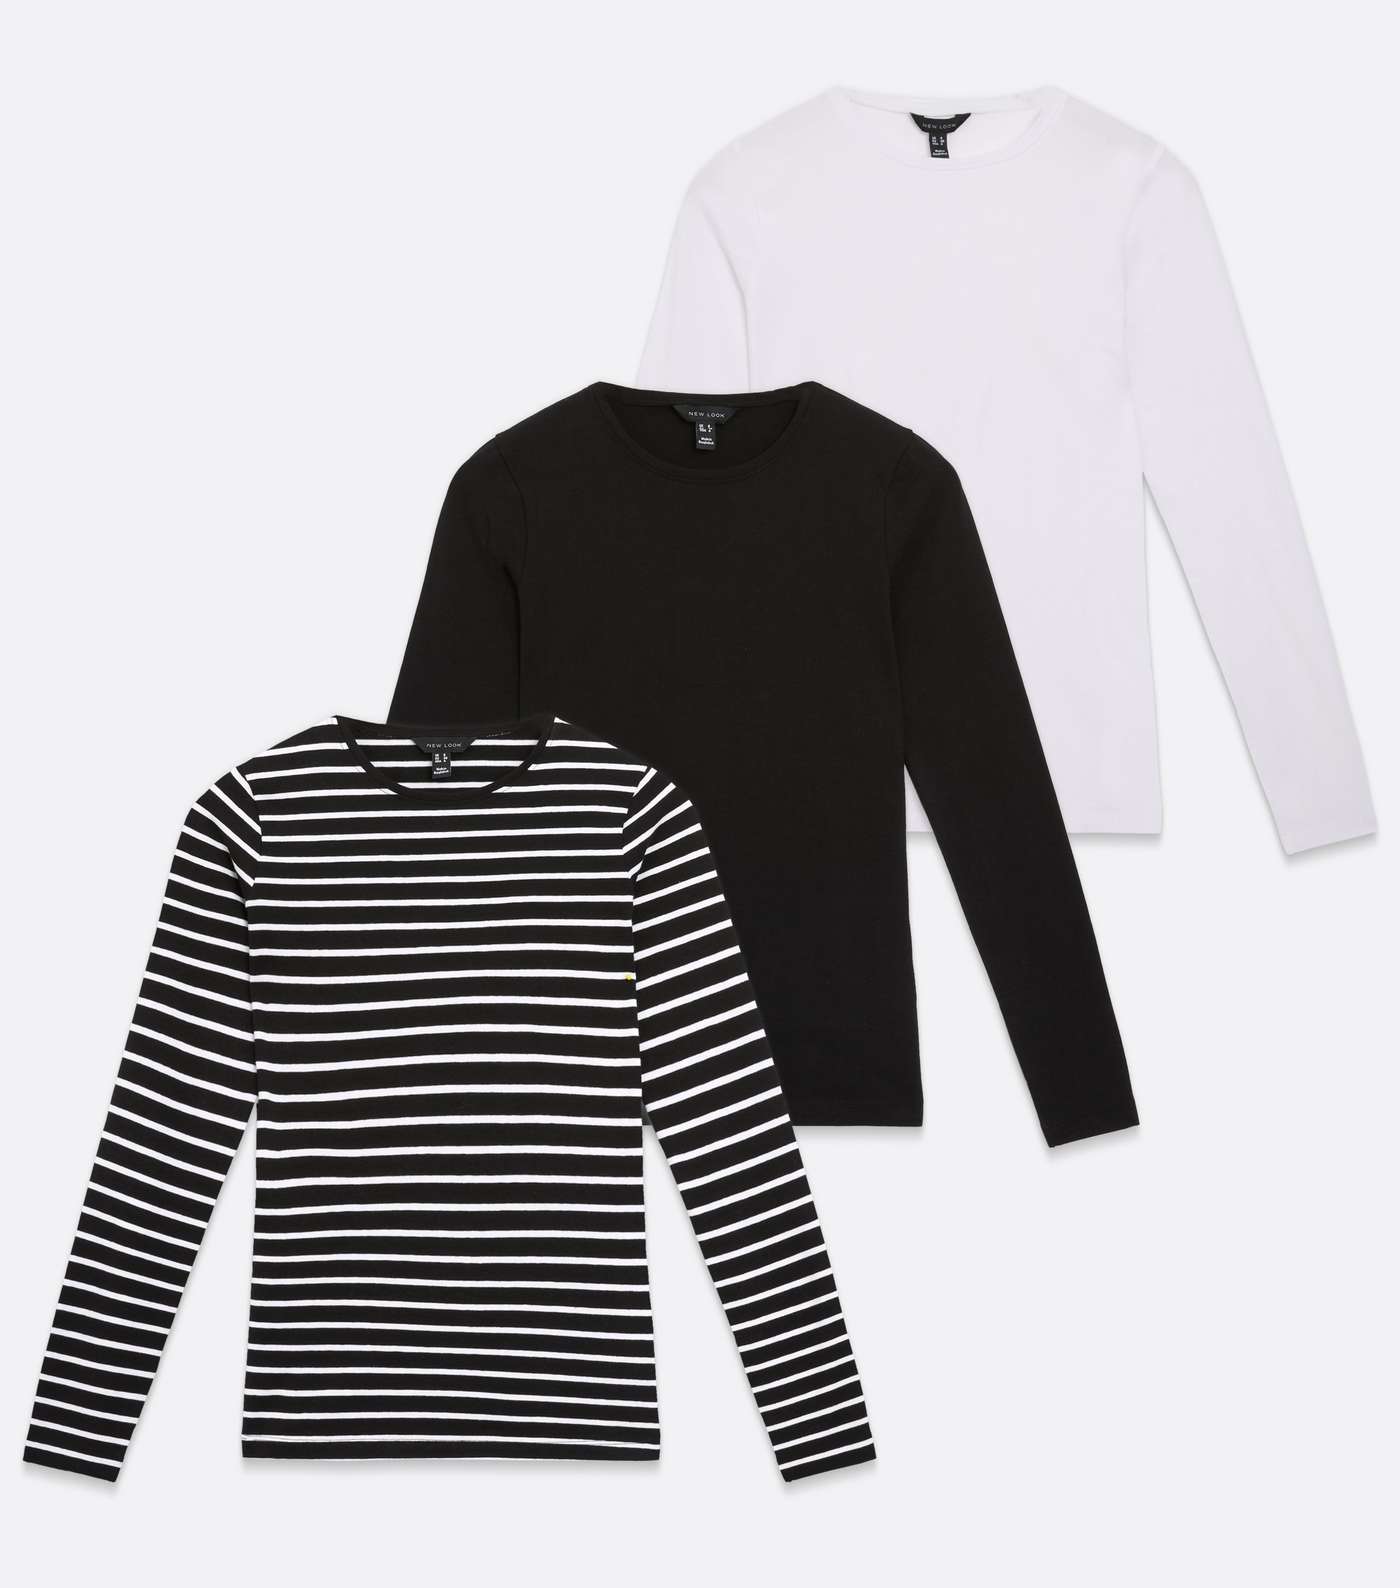 3 Pack Black White and Stripe Long Sleeve Crew Tops Image 5